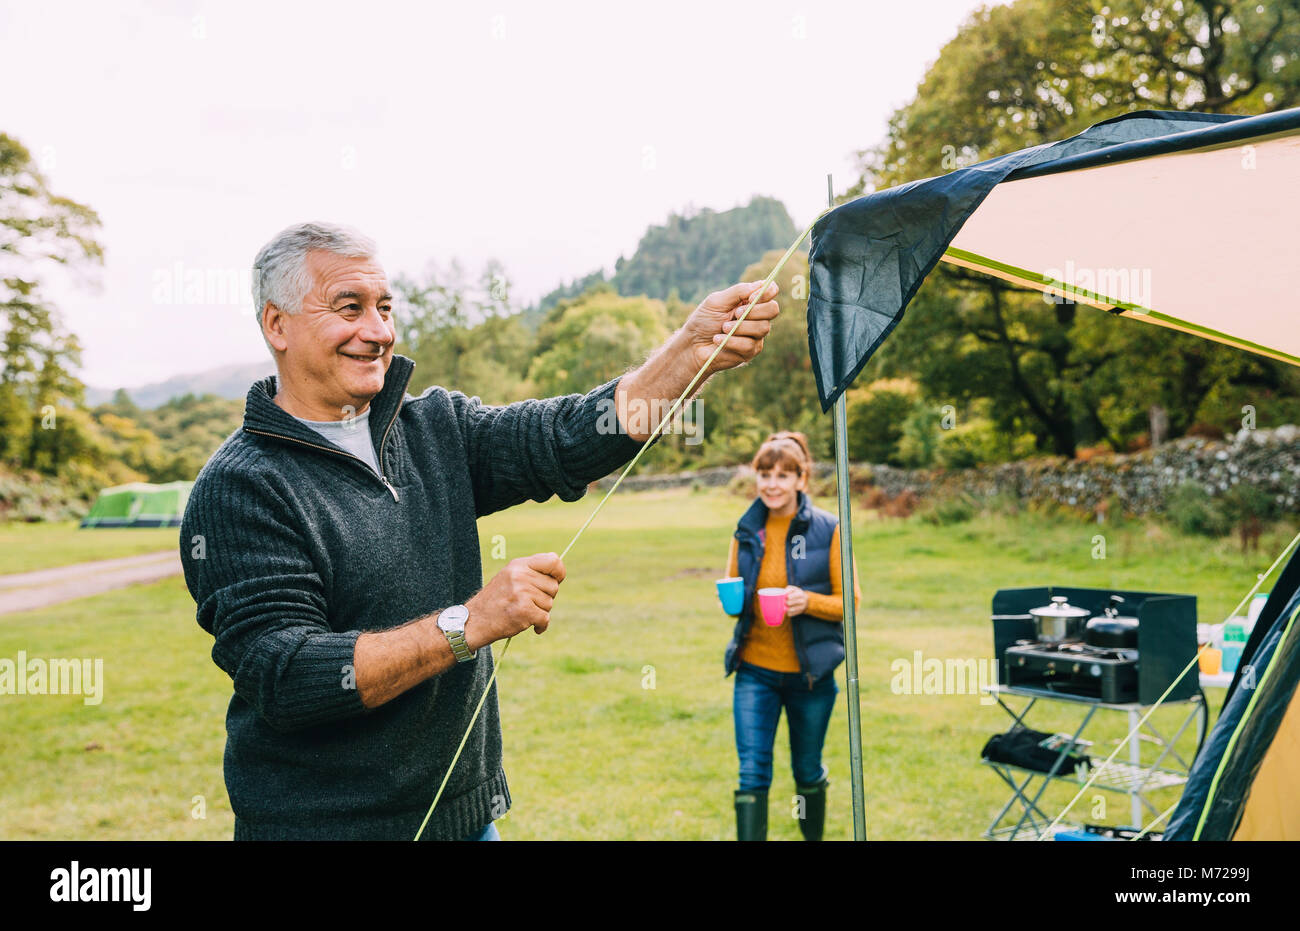 Senior couple have arrive at the campsite they are staing in. The man is putting up their tent while his wife makes cups of tea for everybody. Stock Photo